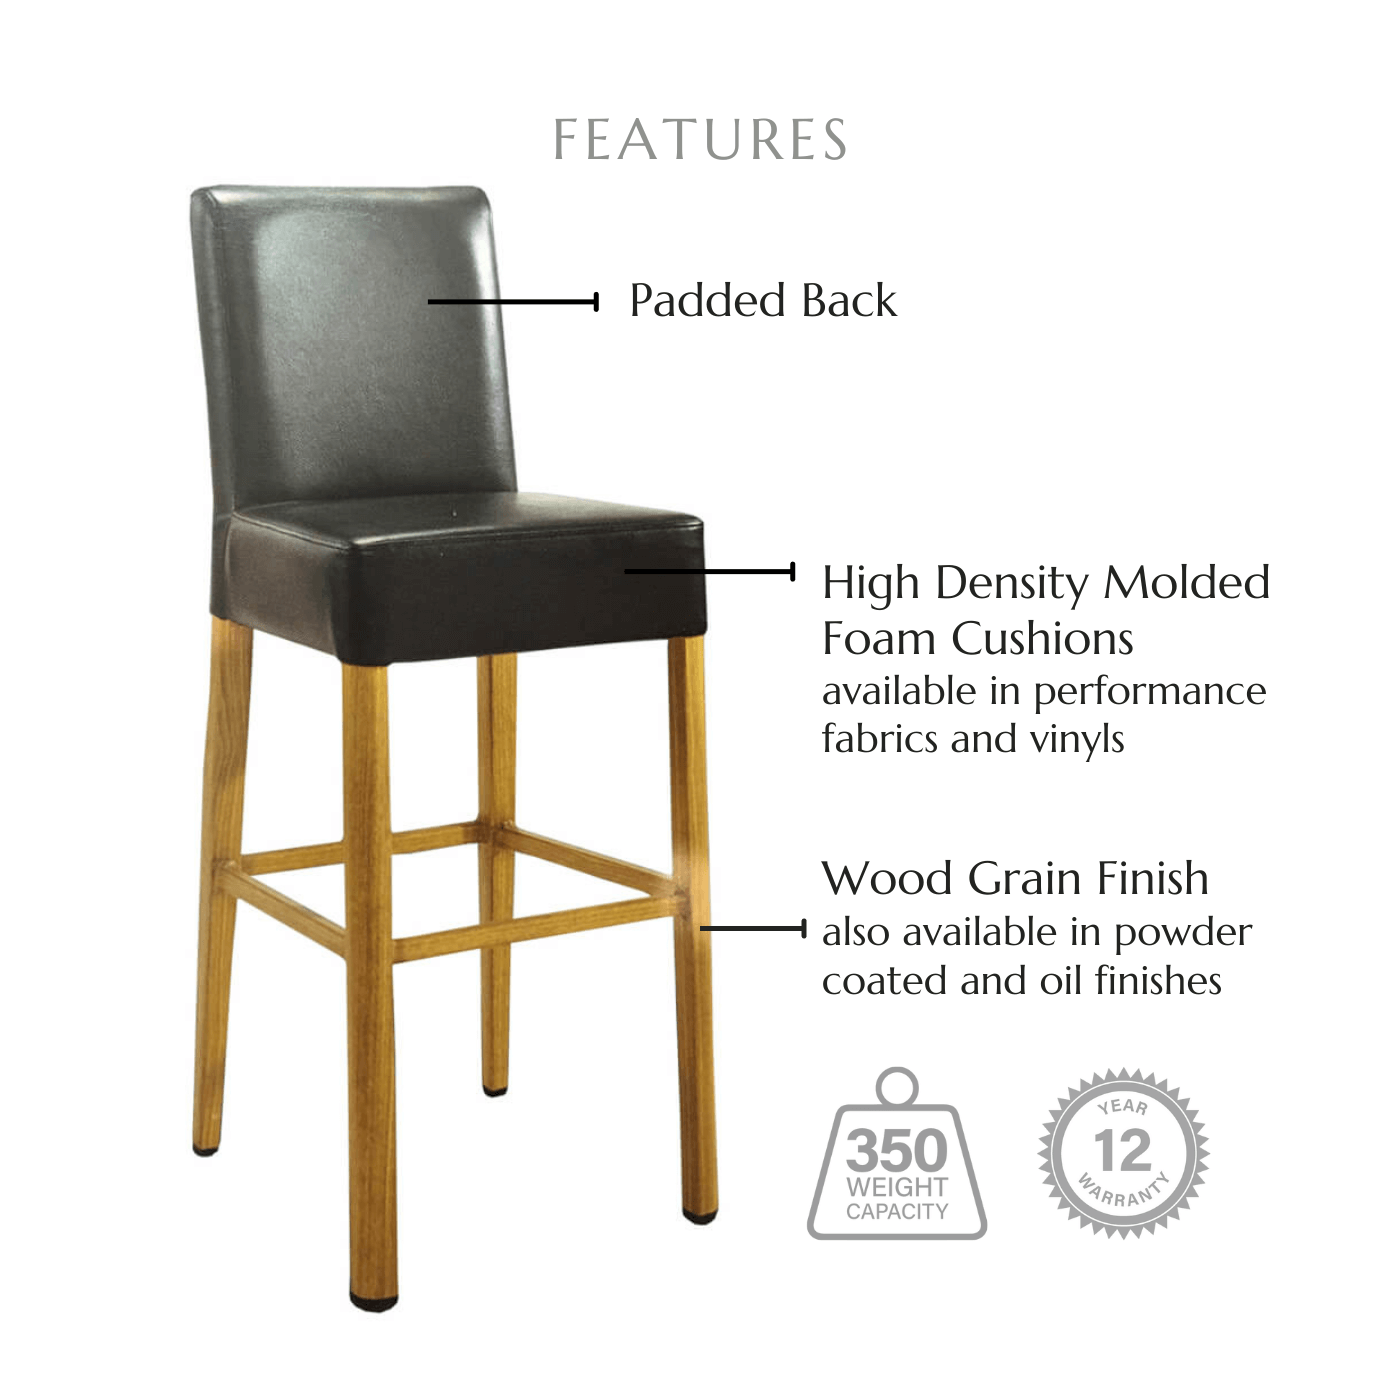 Featuring a back cushion, high density molded foam cushions available in performance fabrics and vinyls, wood grain finish also available in powder coated and oil based finishes. This stool has a 350 lb weight capacity with a 12-year warranty.